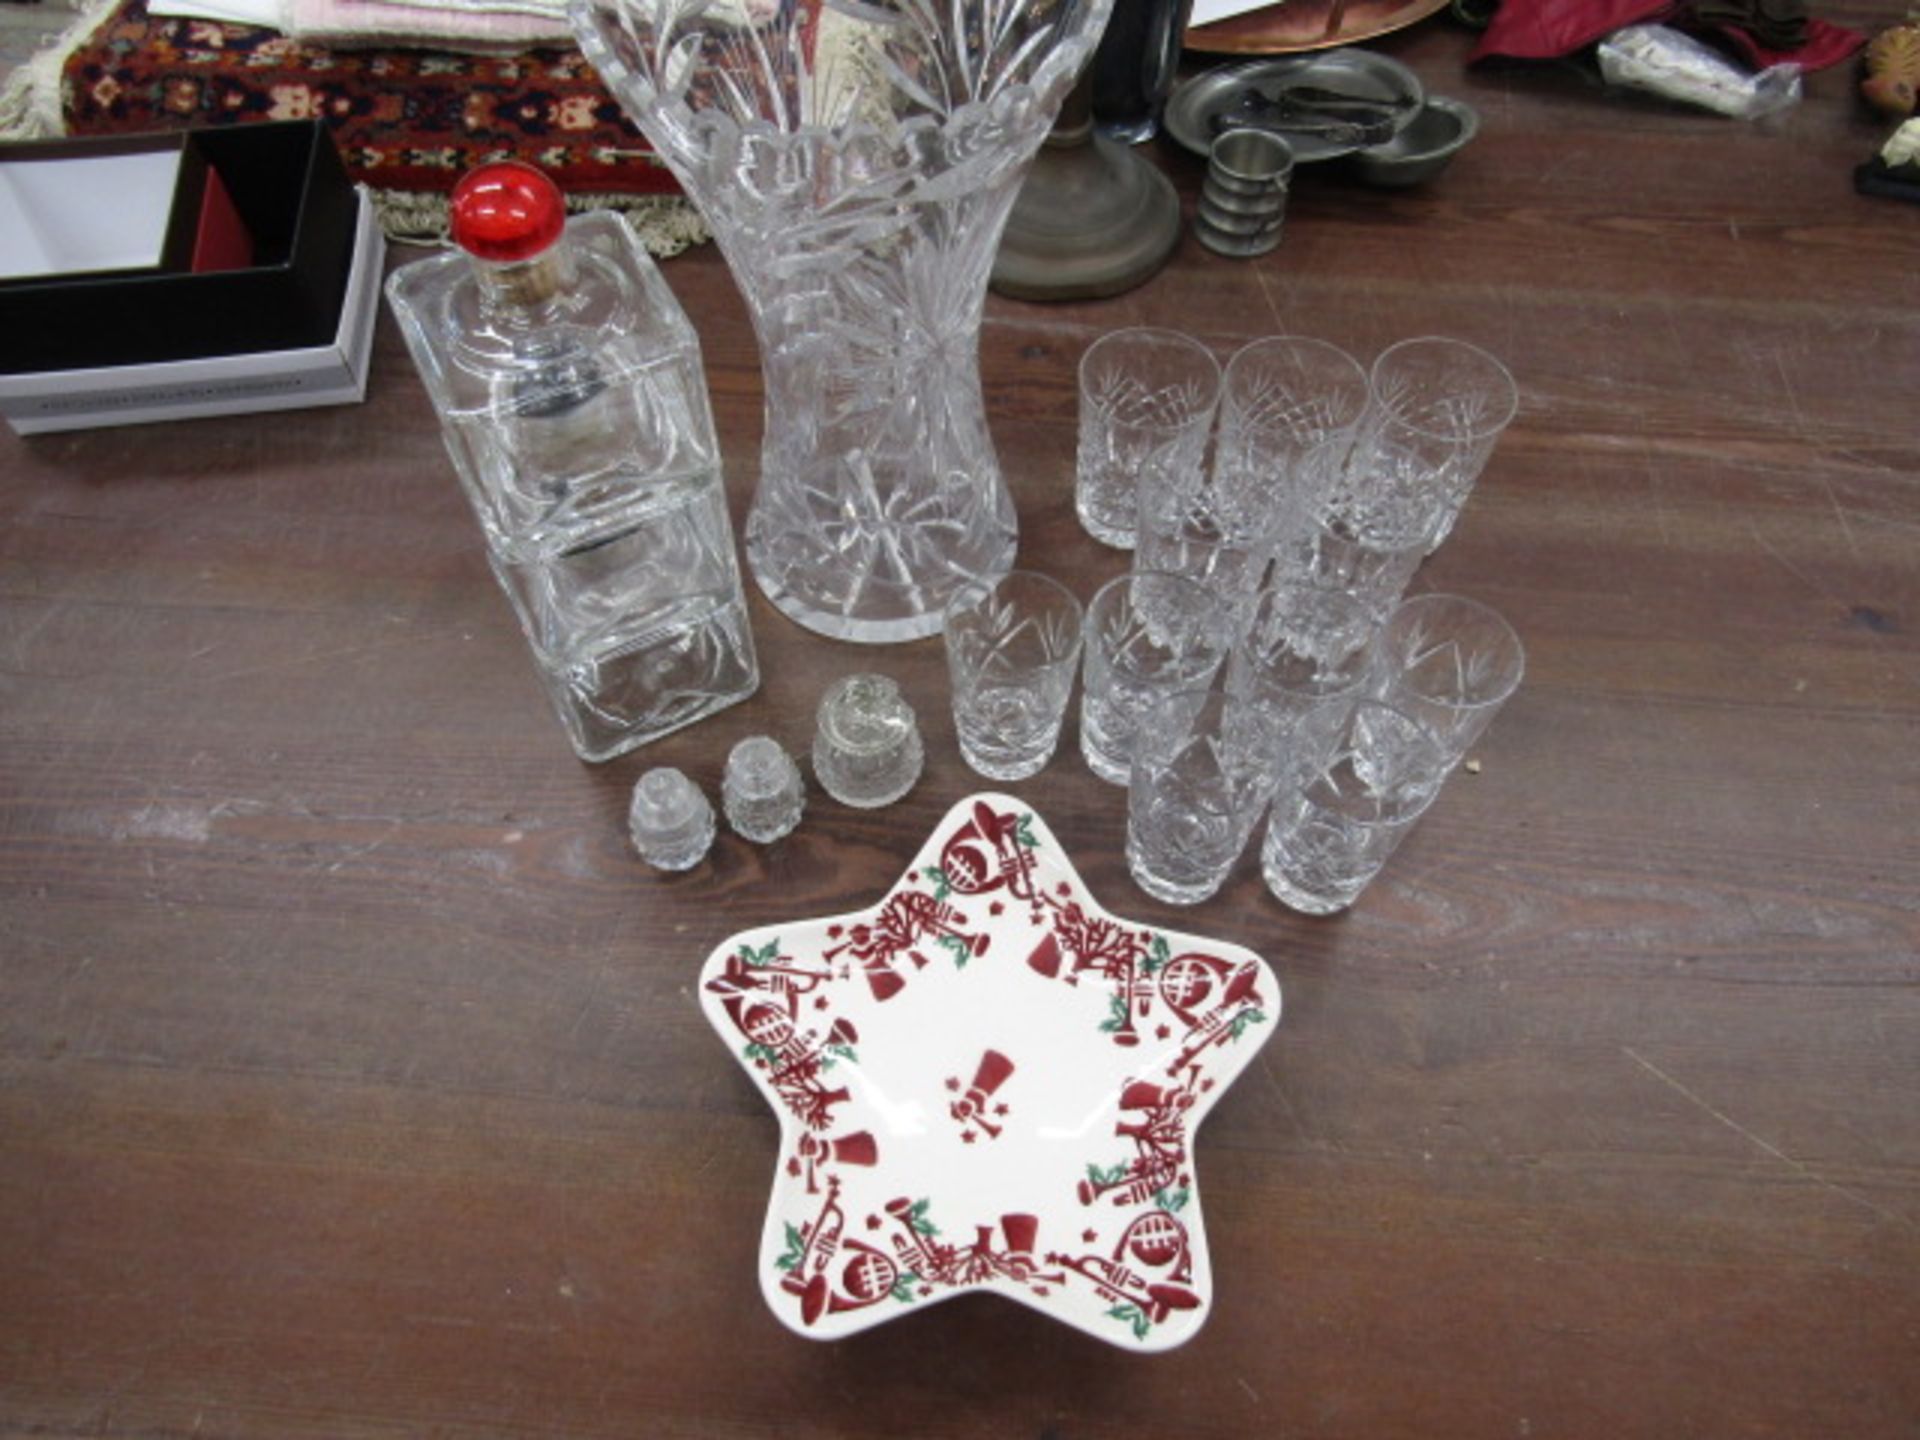 Emma Bridgewater star shaped dish, heavy crystal vase, quality cut glasses and various glassware